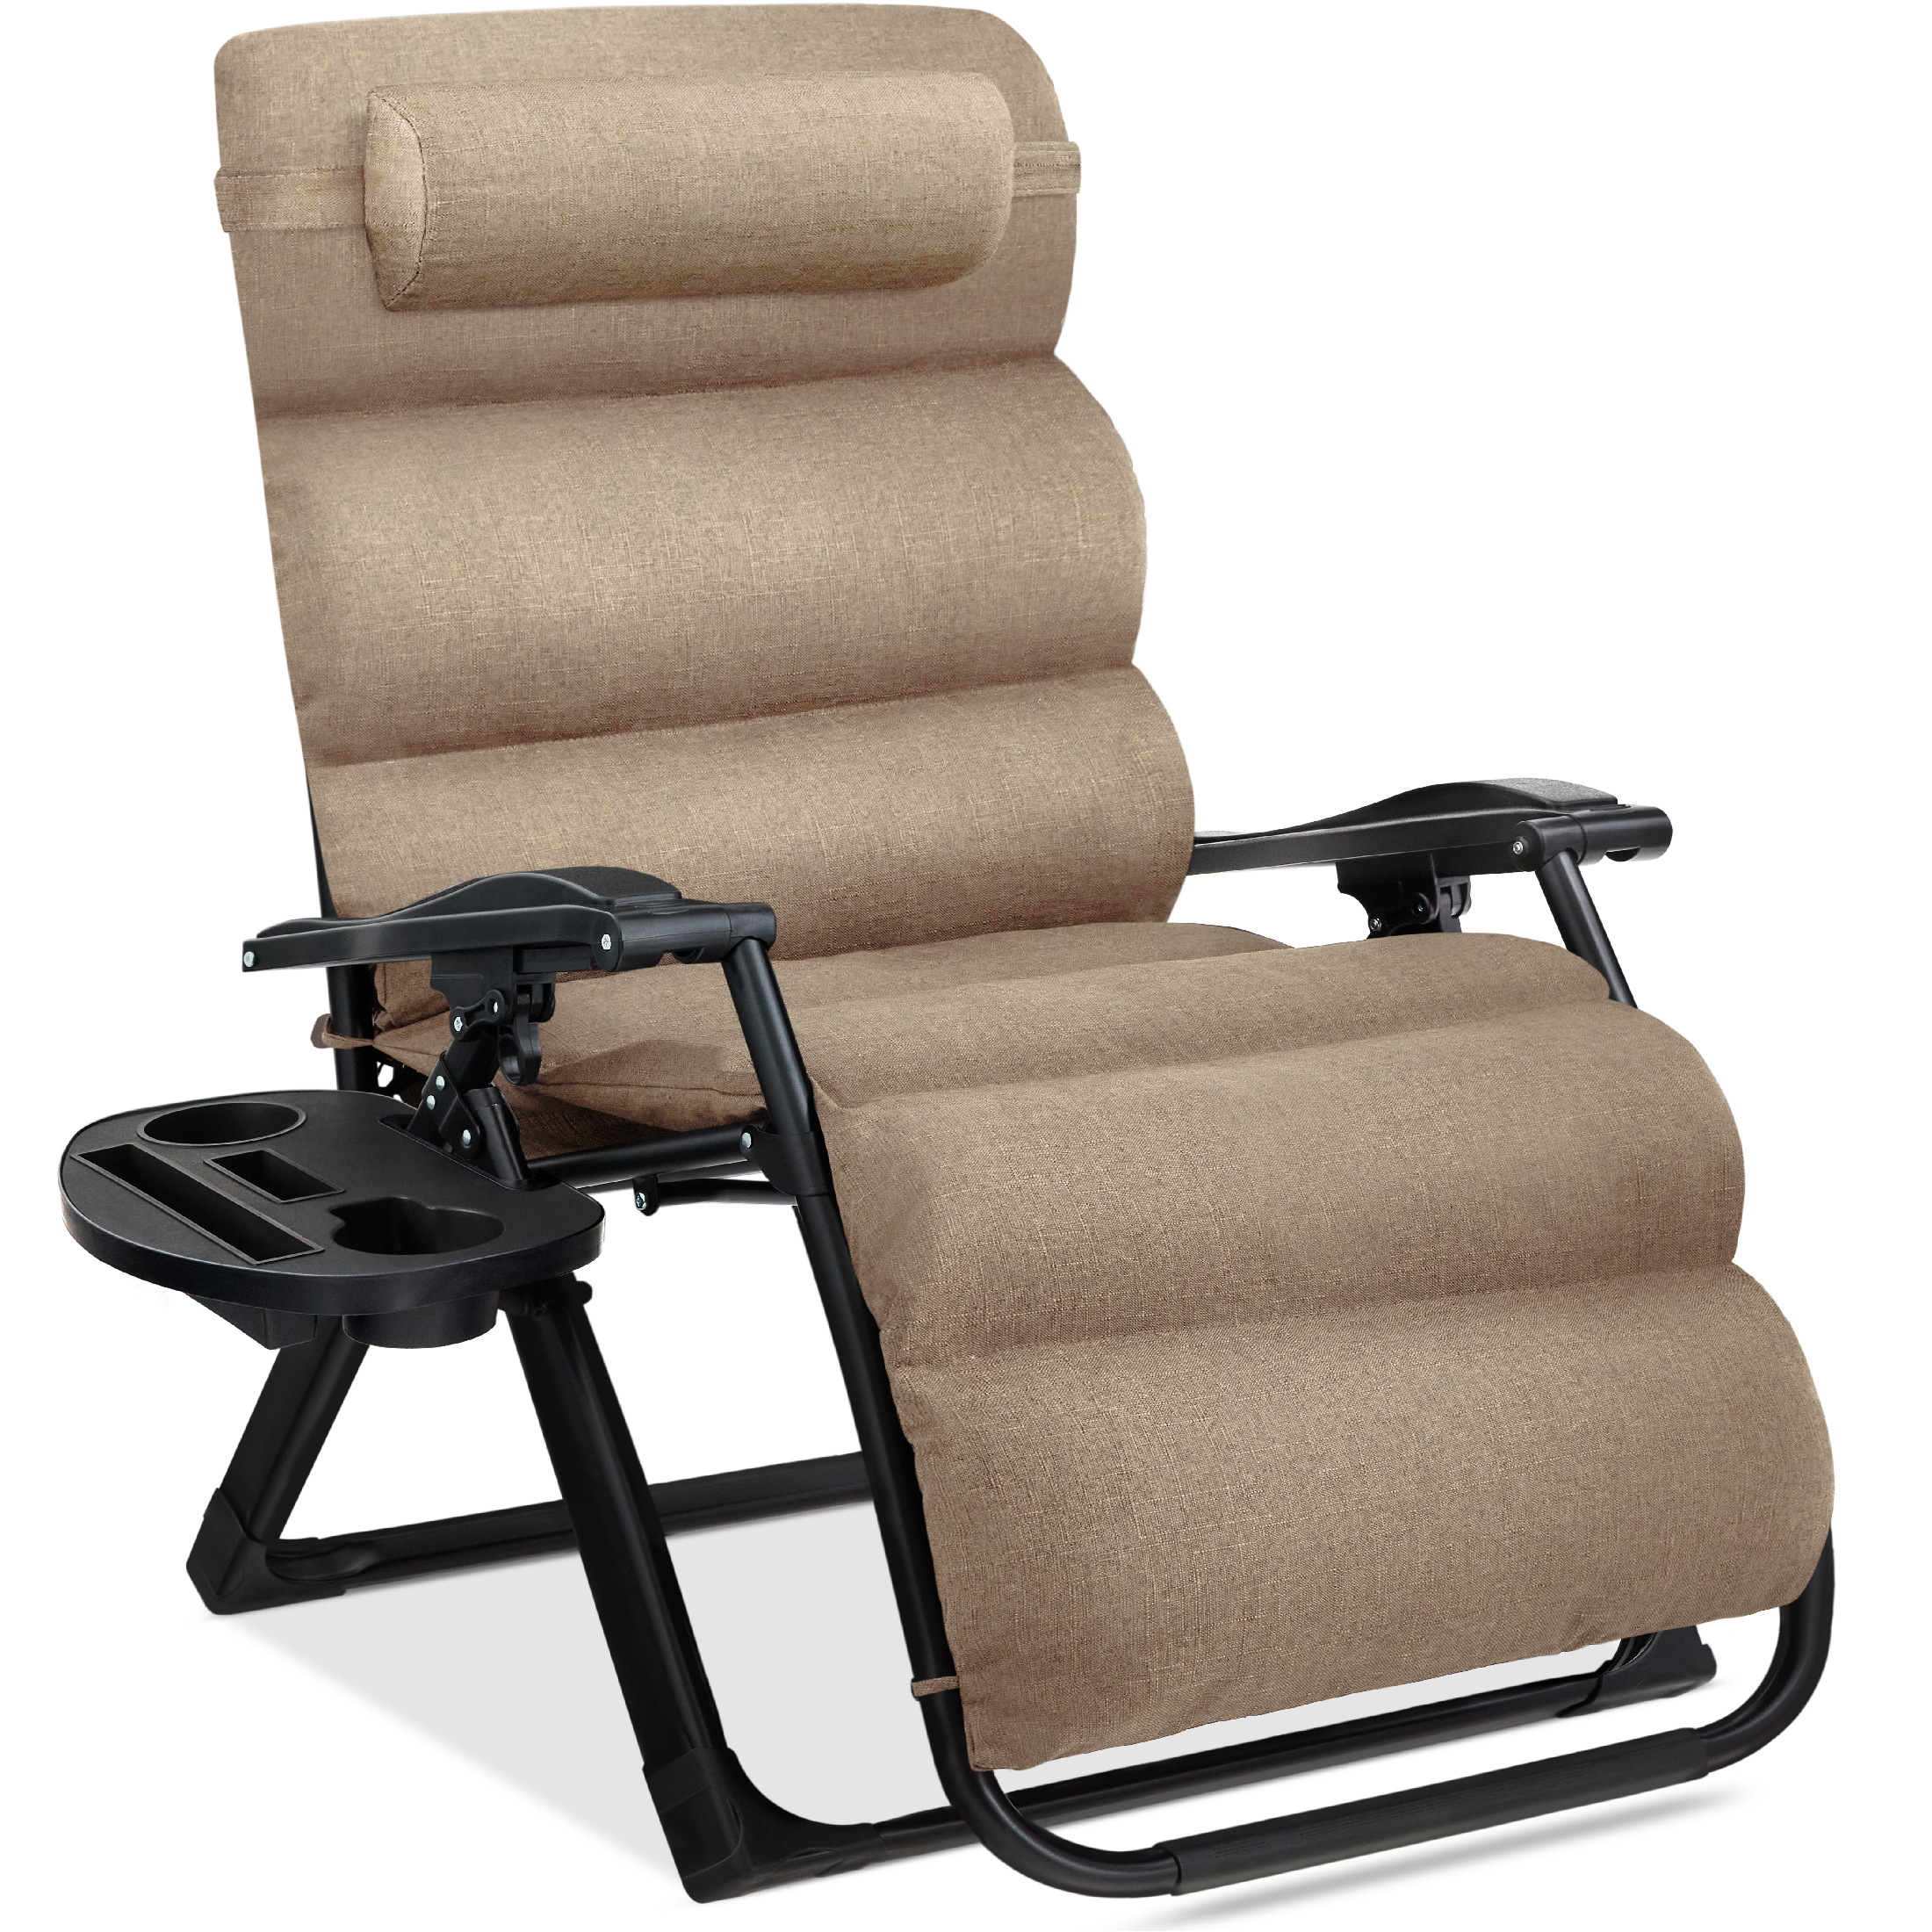 The Ultimate Recliner: Choosing the Best for Relaxation插图3